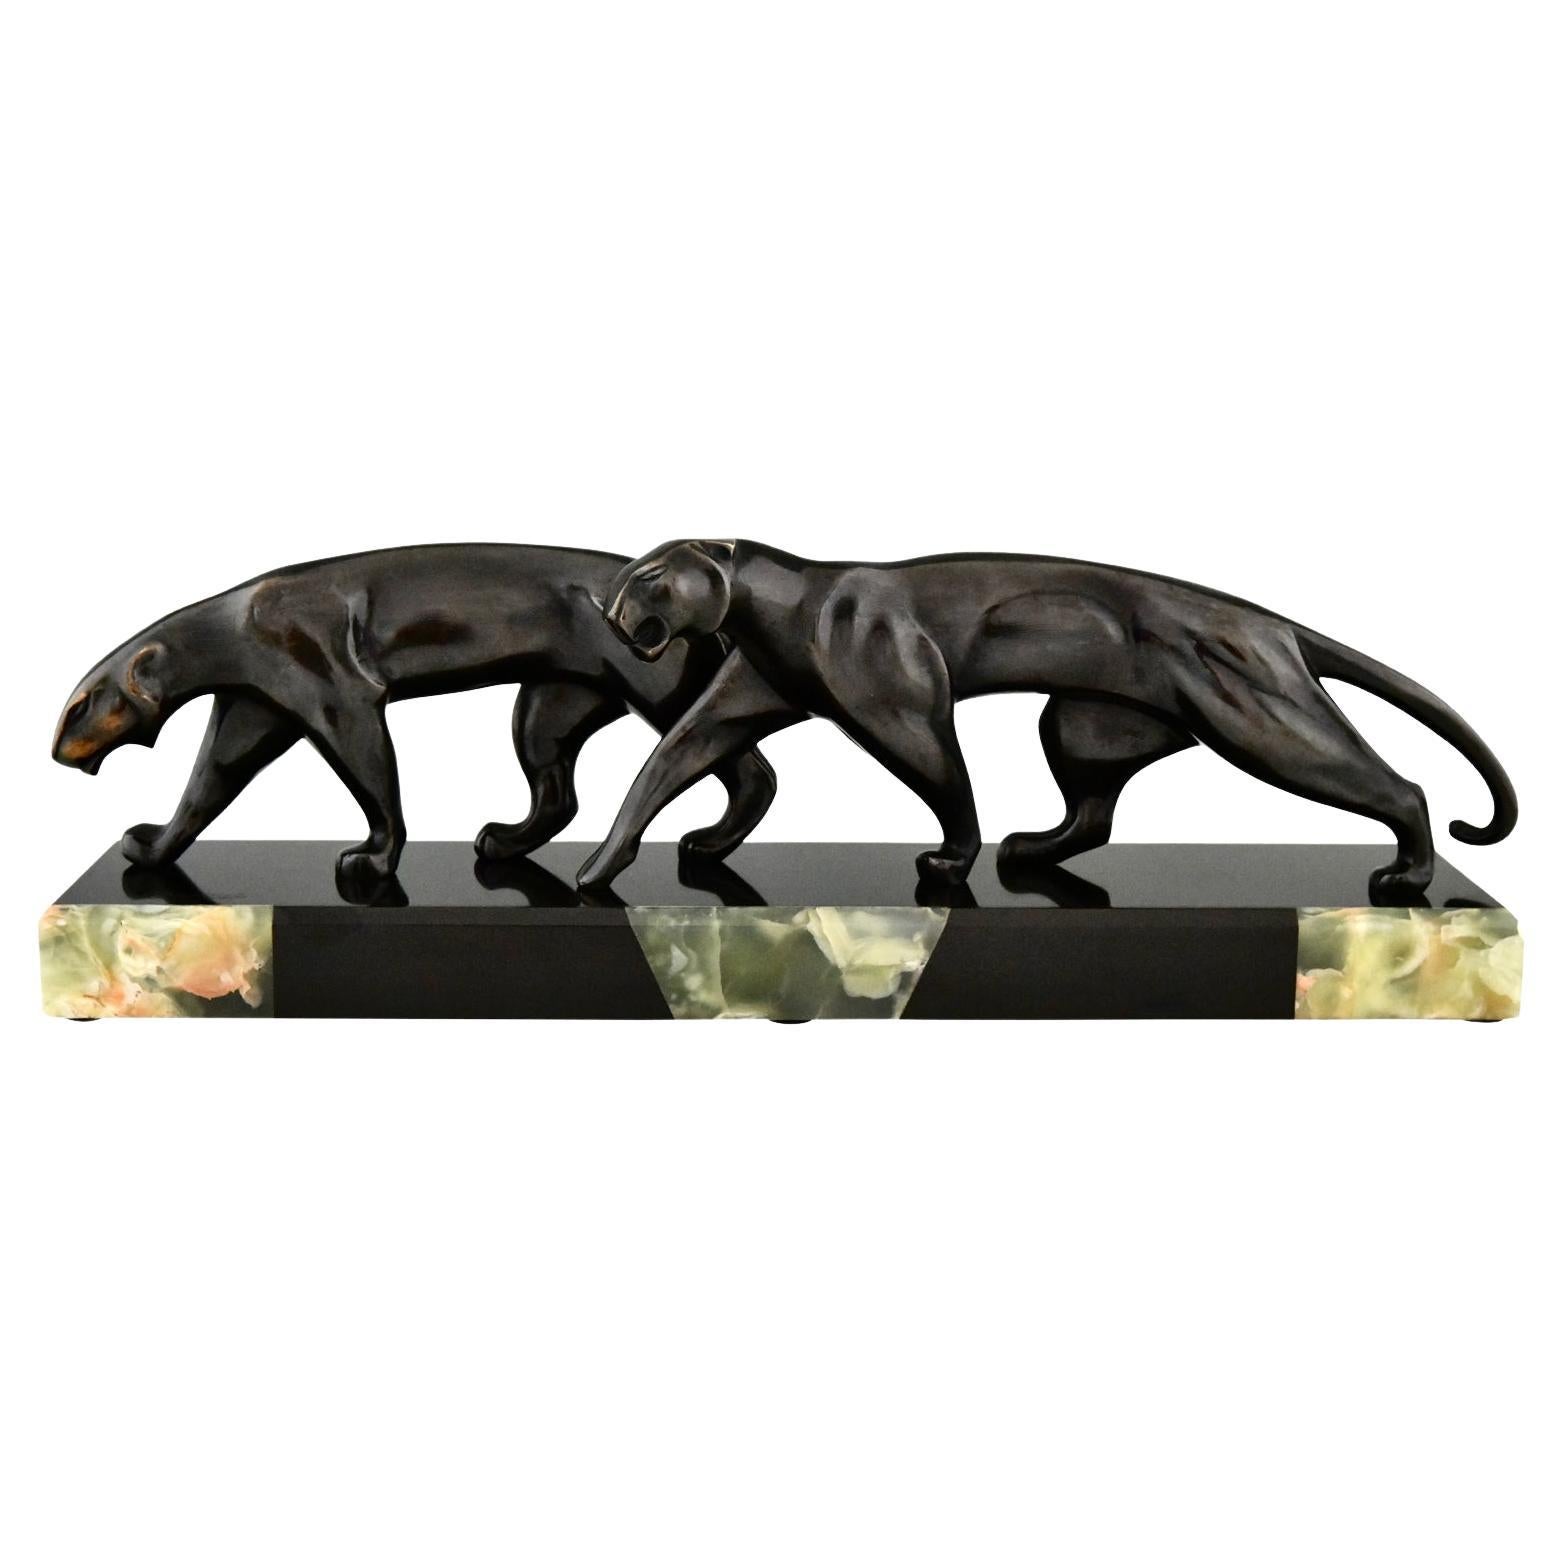 Art Deco bronze sculpture two panthers signed by Michel Decoux 1920 For Sale